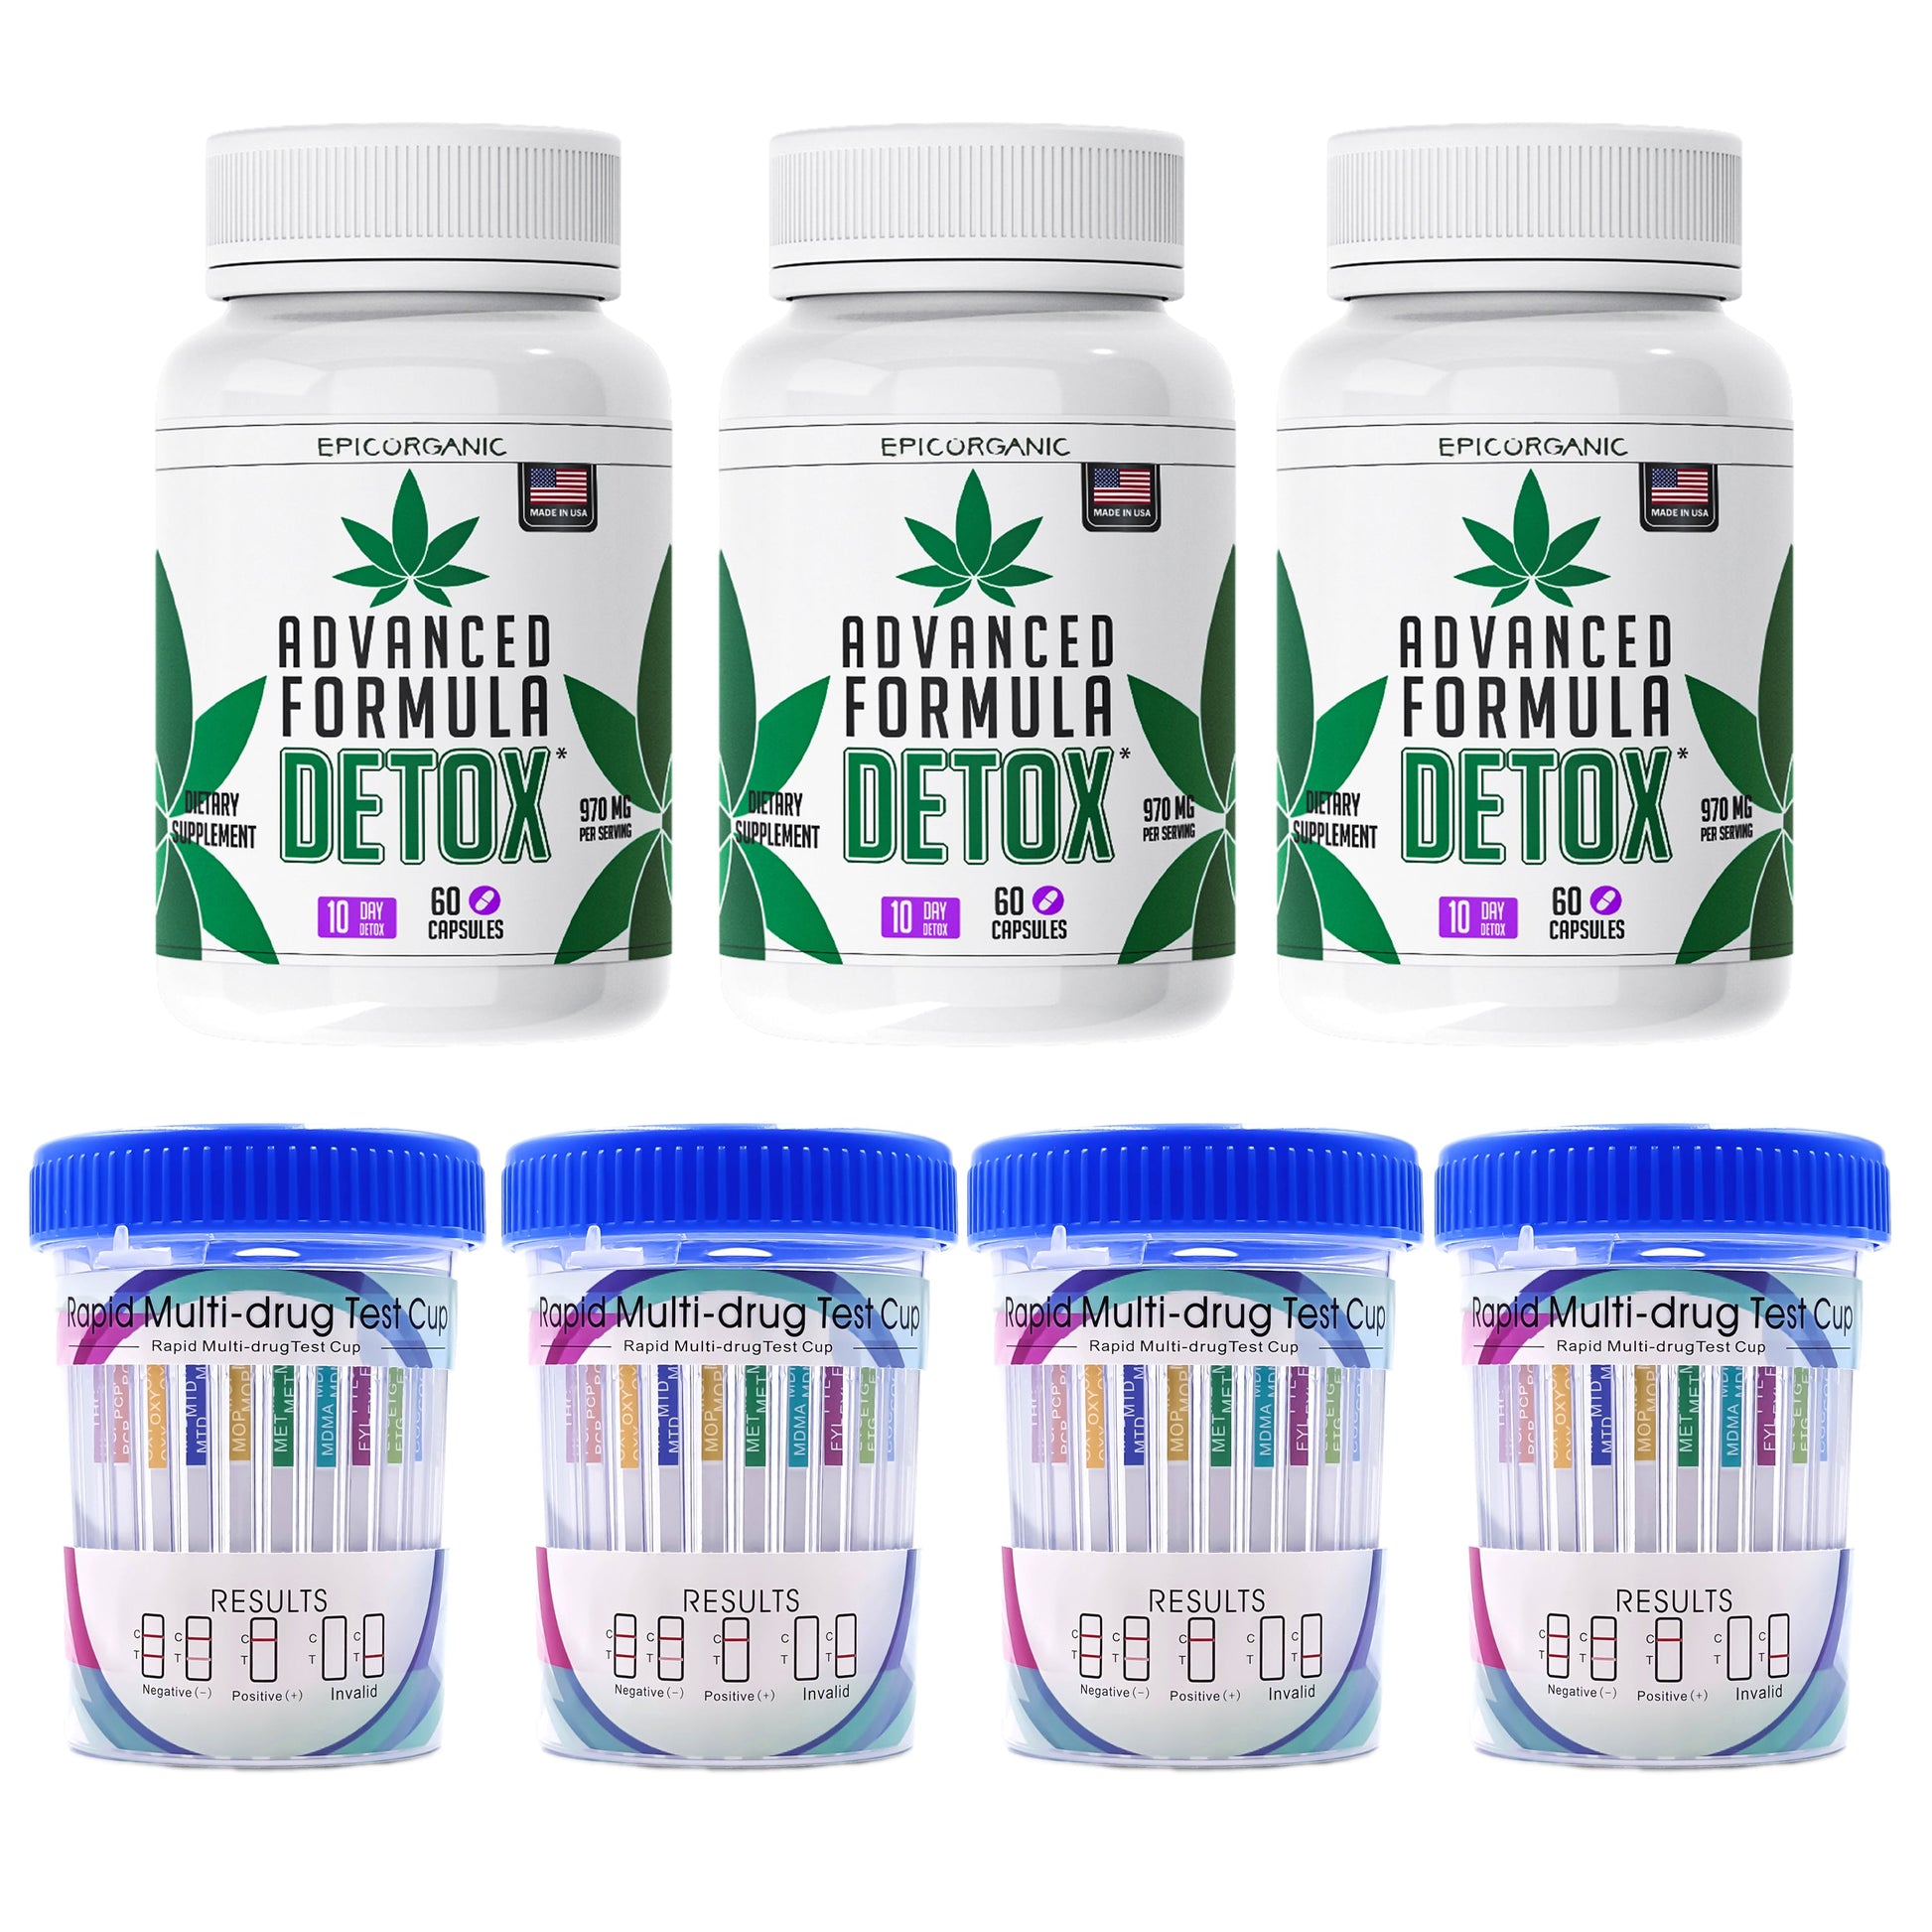 THC & DRUG PERMANENT DETOX CLEANSE FULL BODY WEED CLEANSE (3x Pack) & MULTI DRUG TEST (4 Pack) Epic Organic